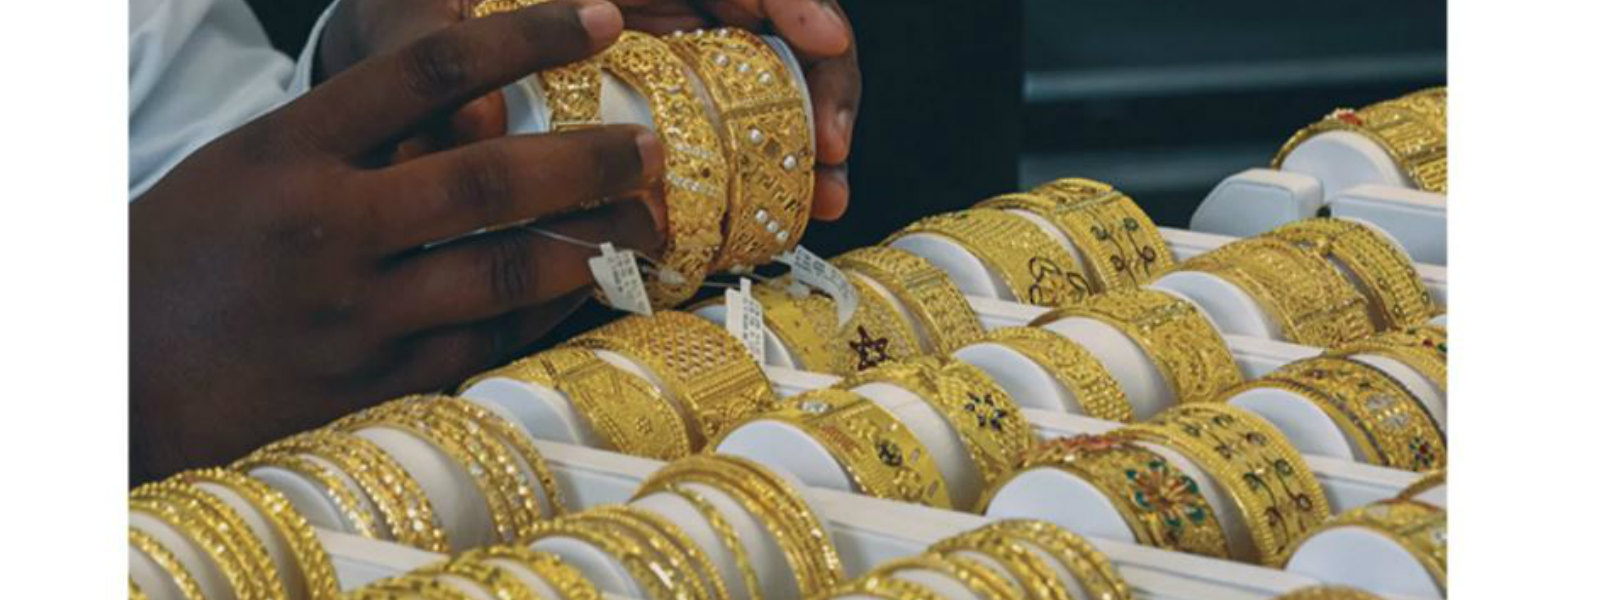 Gold smuggling on the rise 